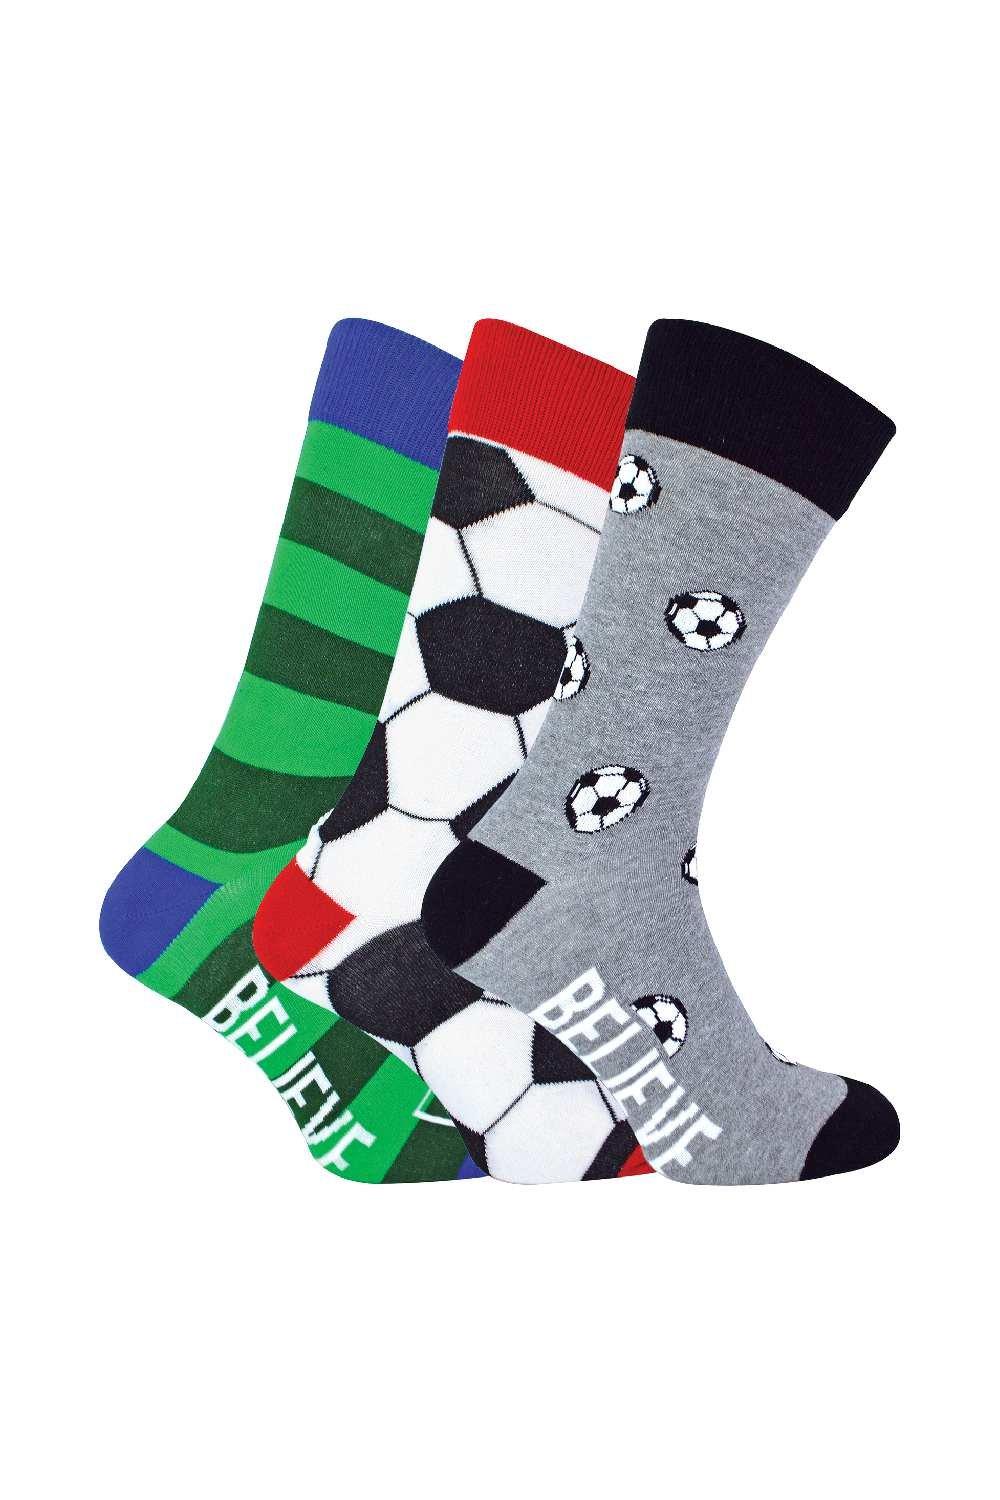 3 Pairs Novelty Cotton Socks with Football Pattern in a Gift Box